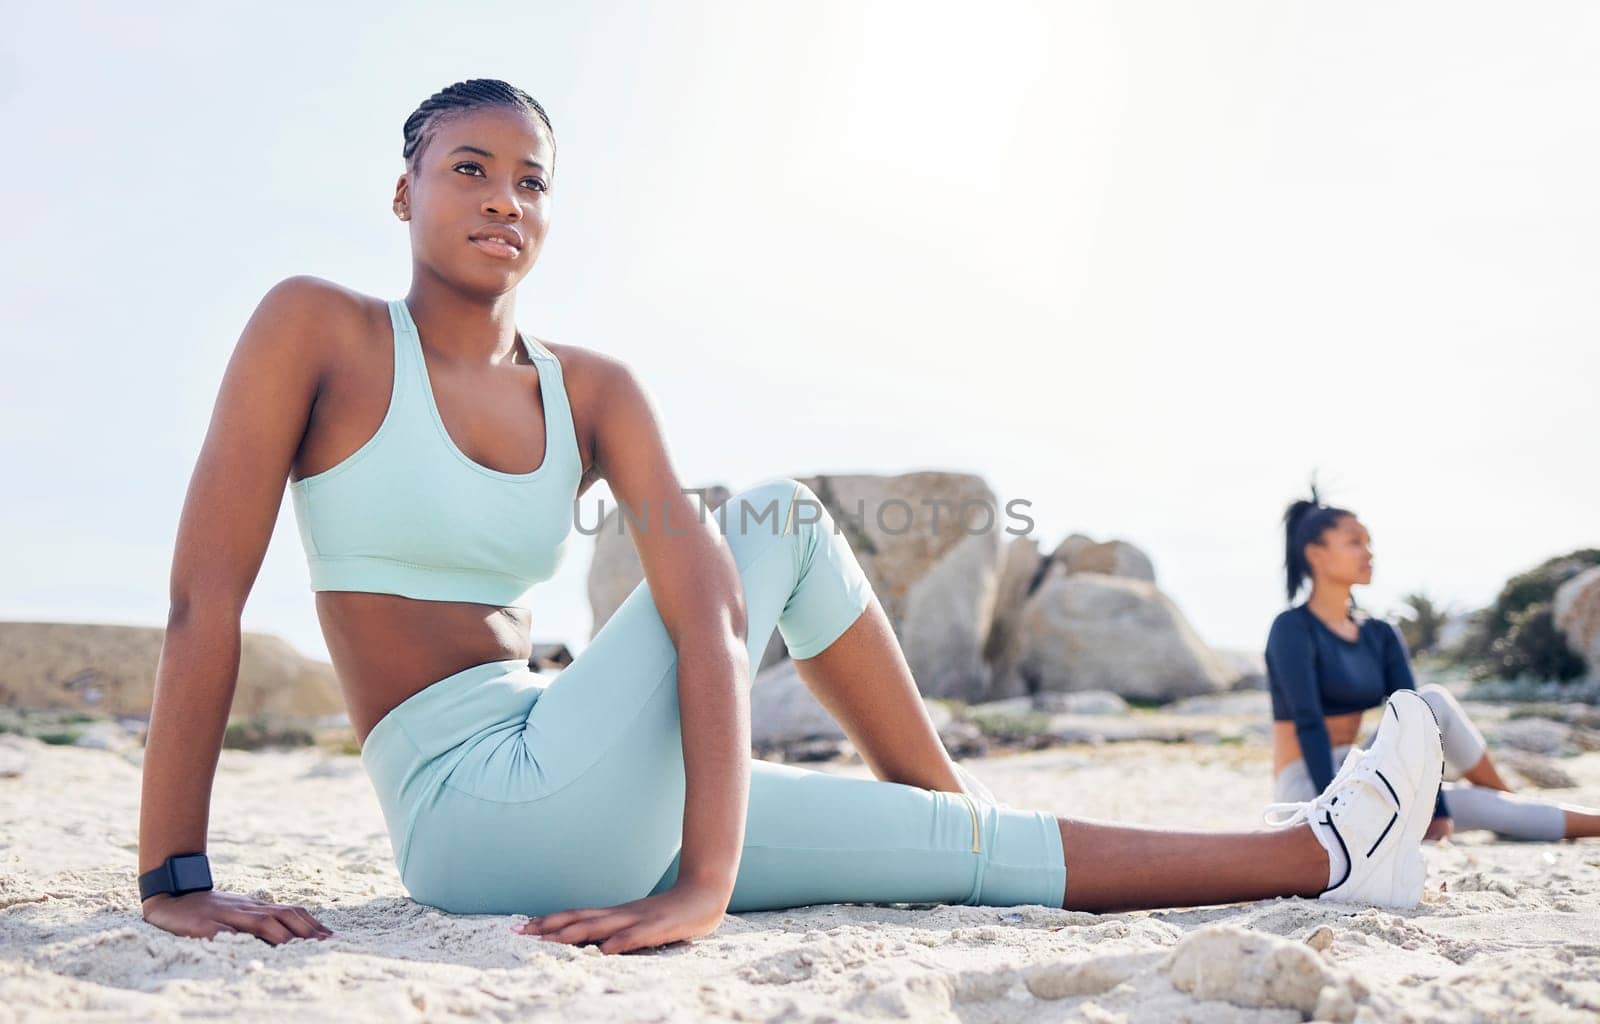 Stretching, summer and friends with women at beach for running, yoga and workout. Relax, health and wellness with female runner and warm up in nature for training, teamwork and cardio performance by YuriArcurs